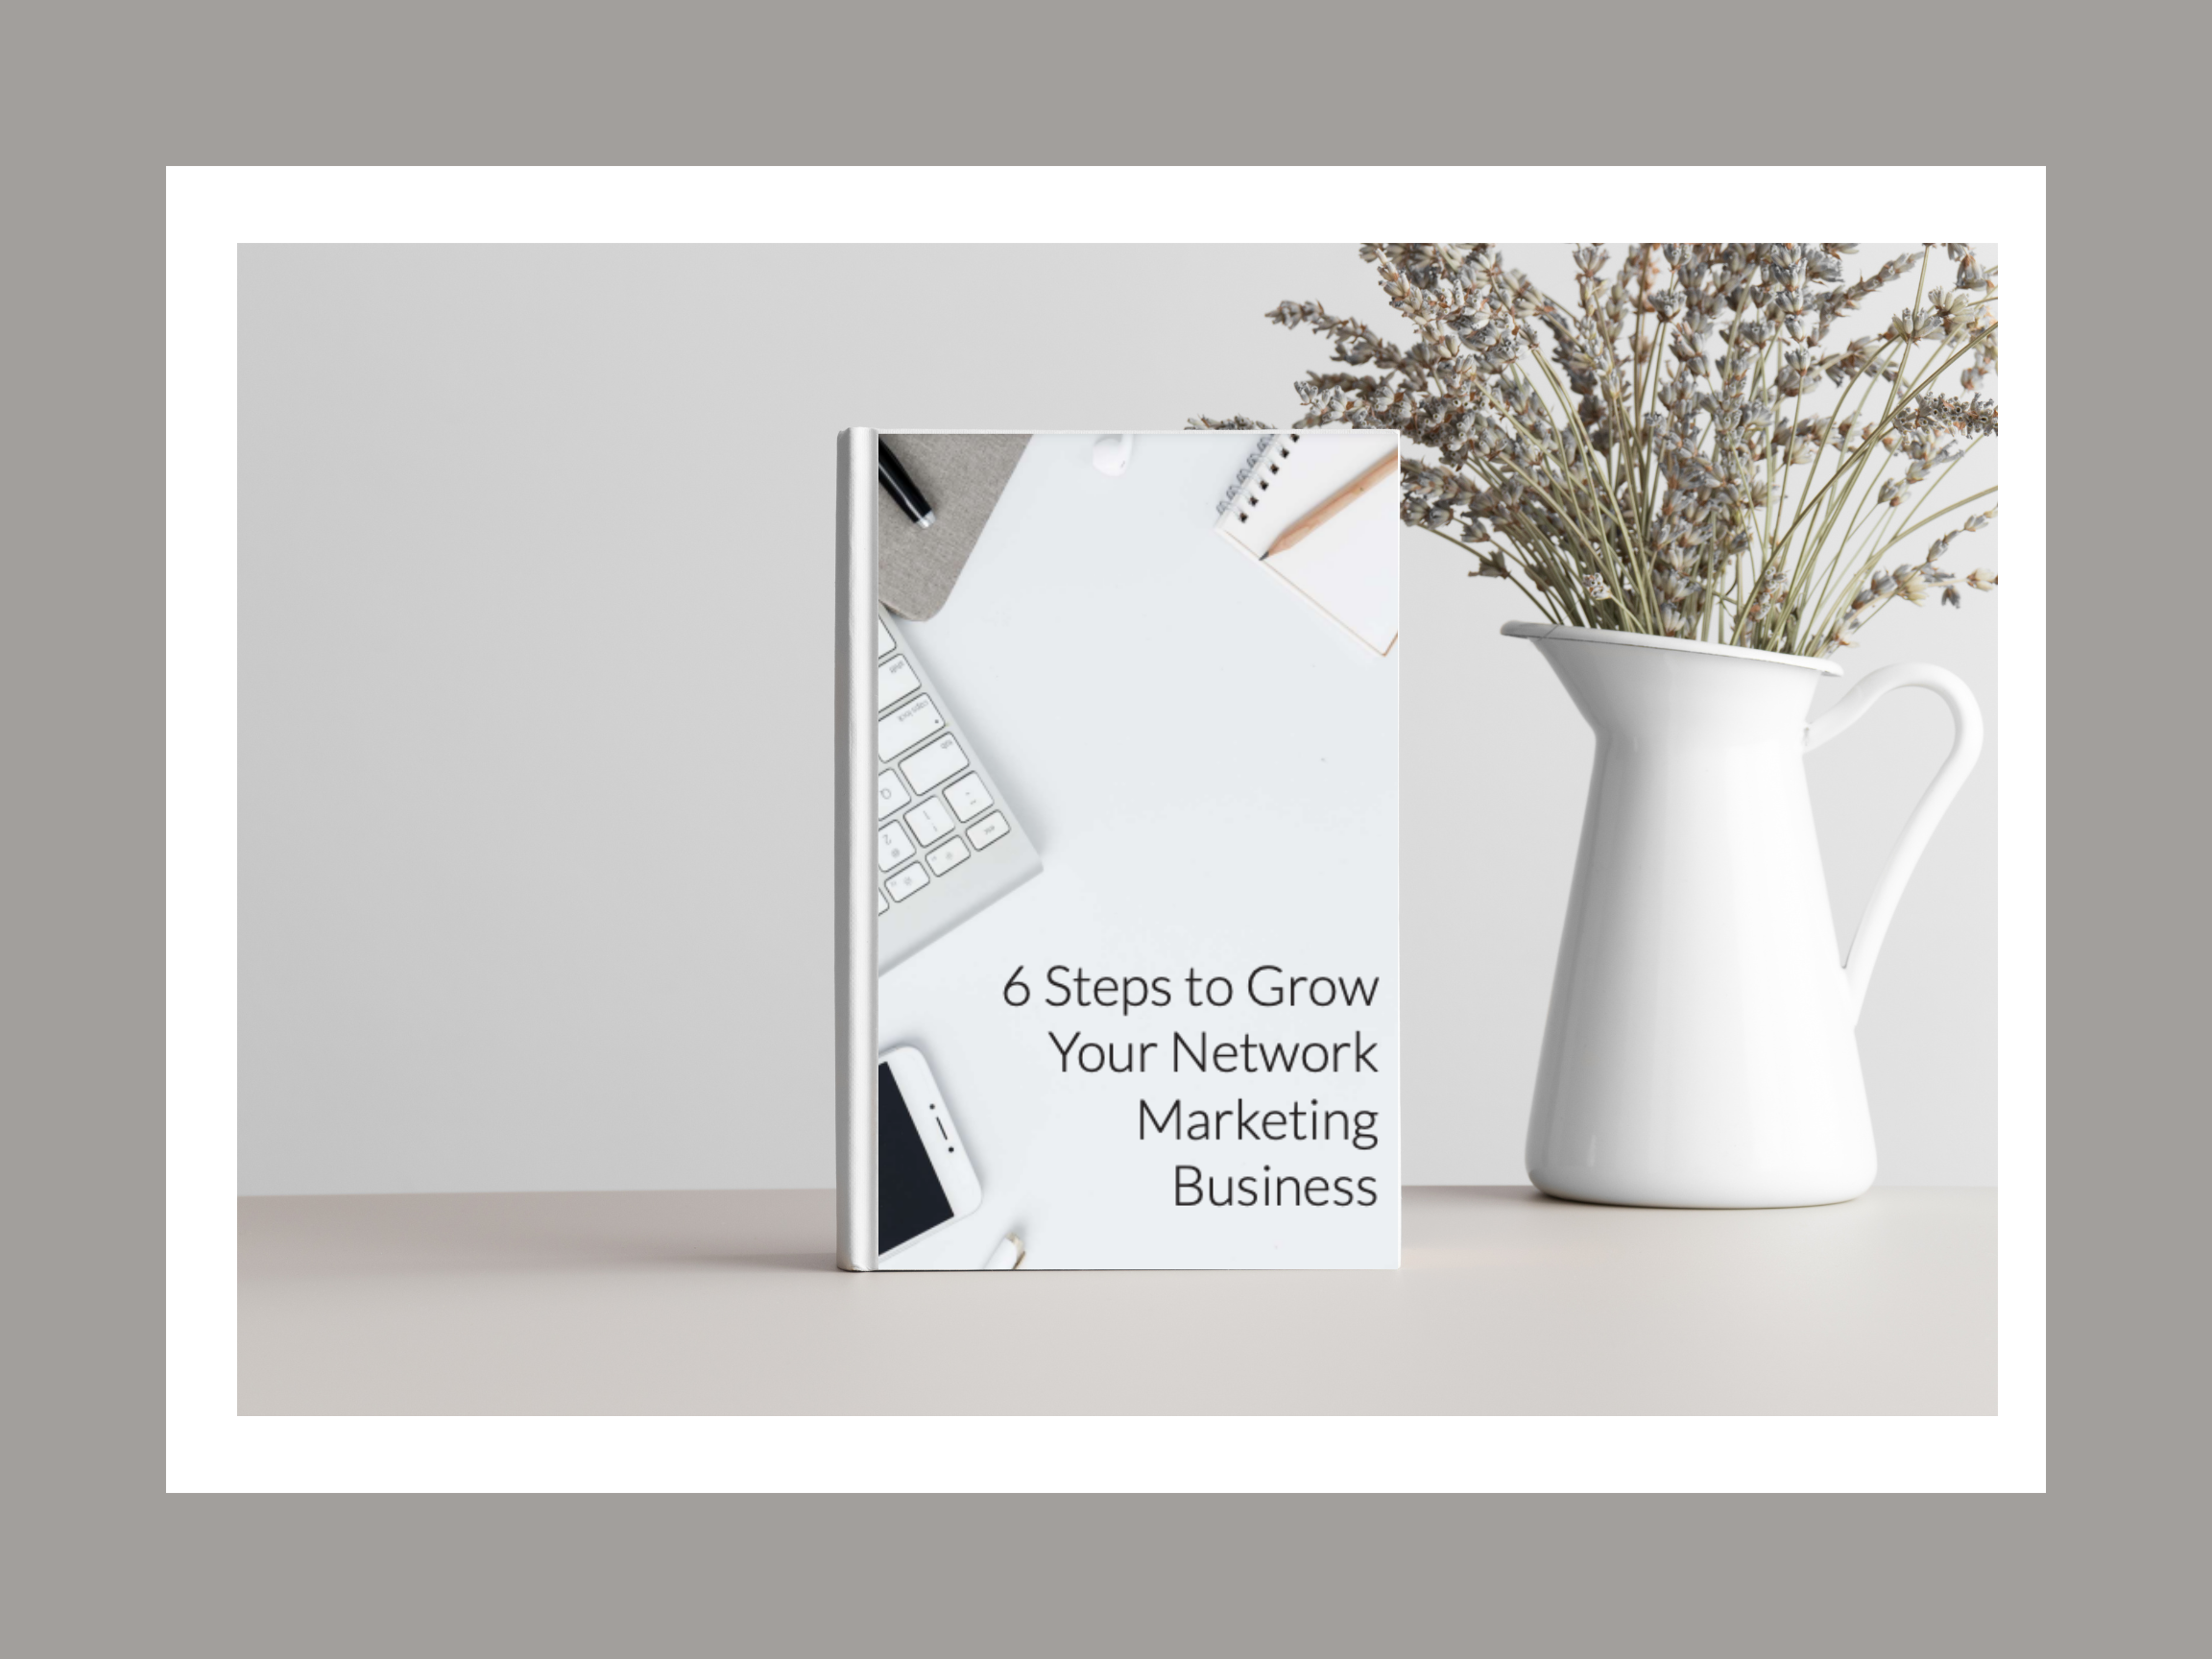 6 Steps to Grow Your Wellness Business eBook sitting up right next to flowers in a white vase